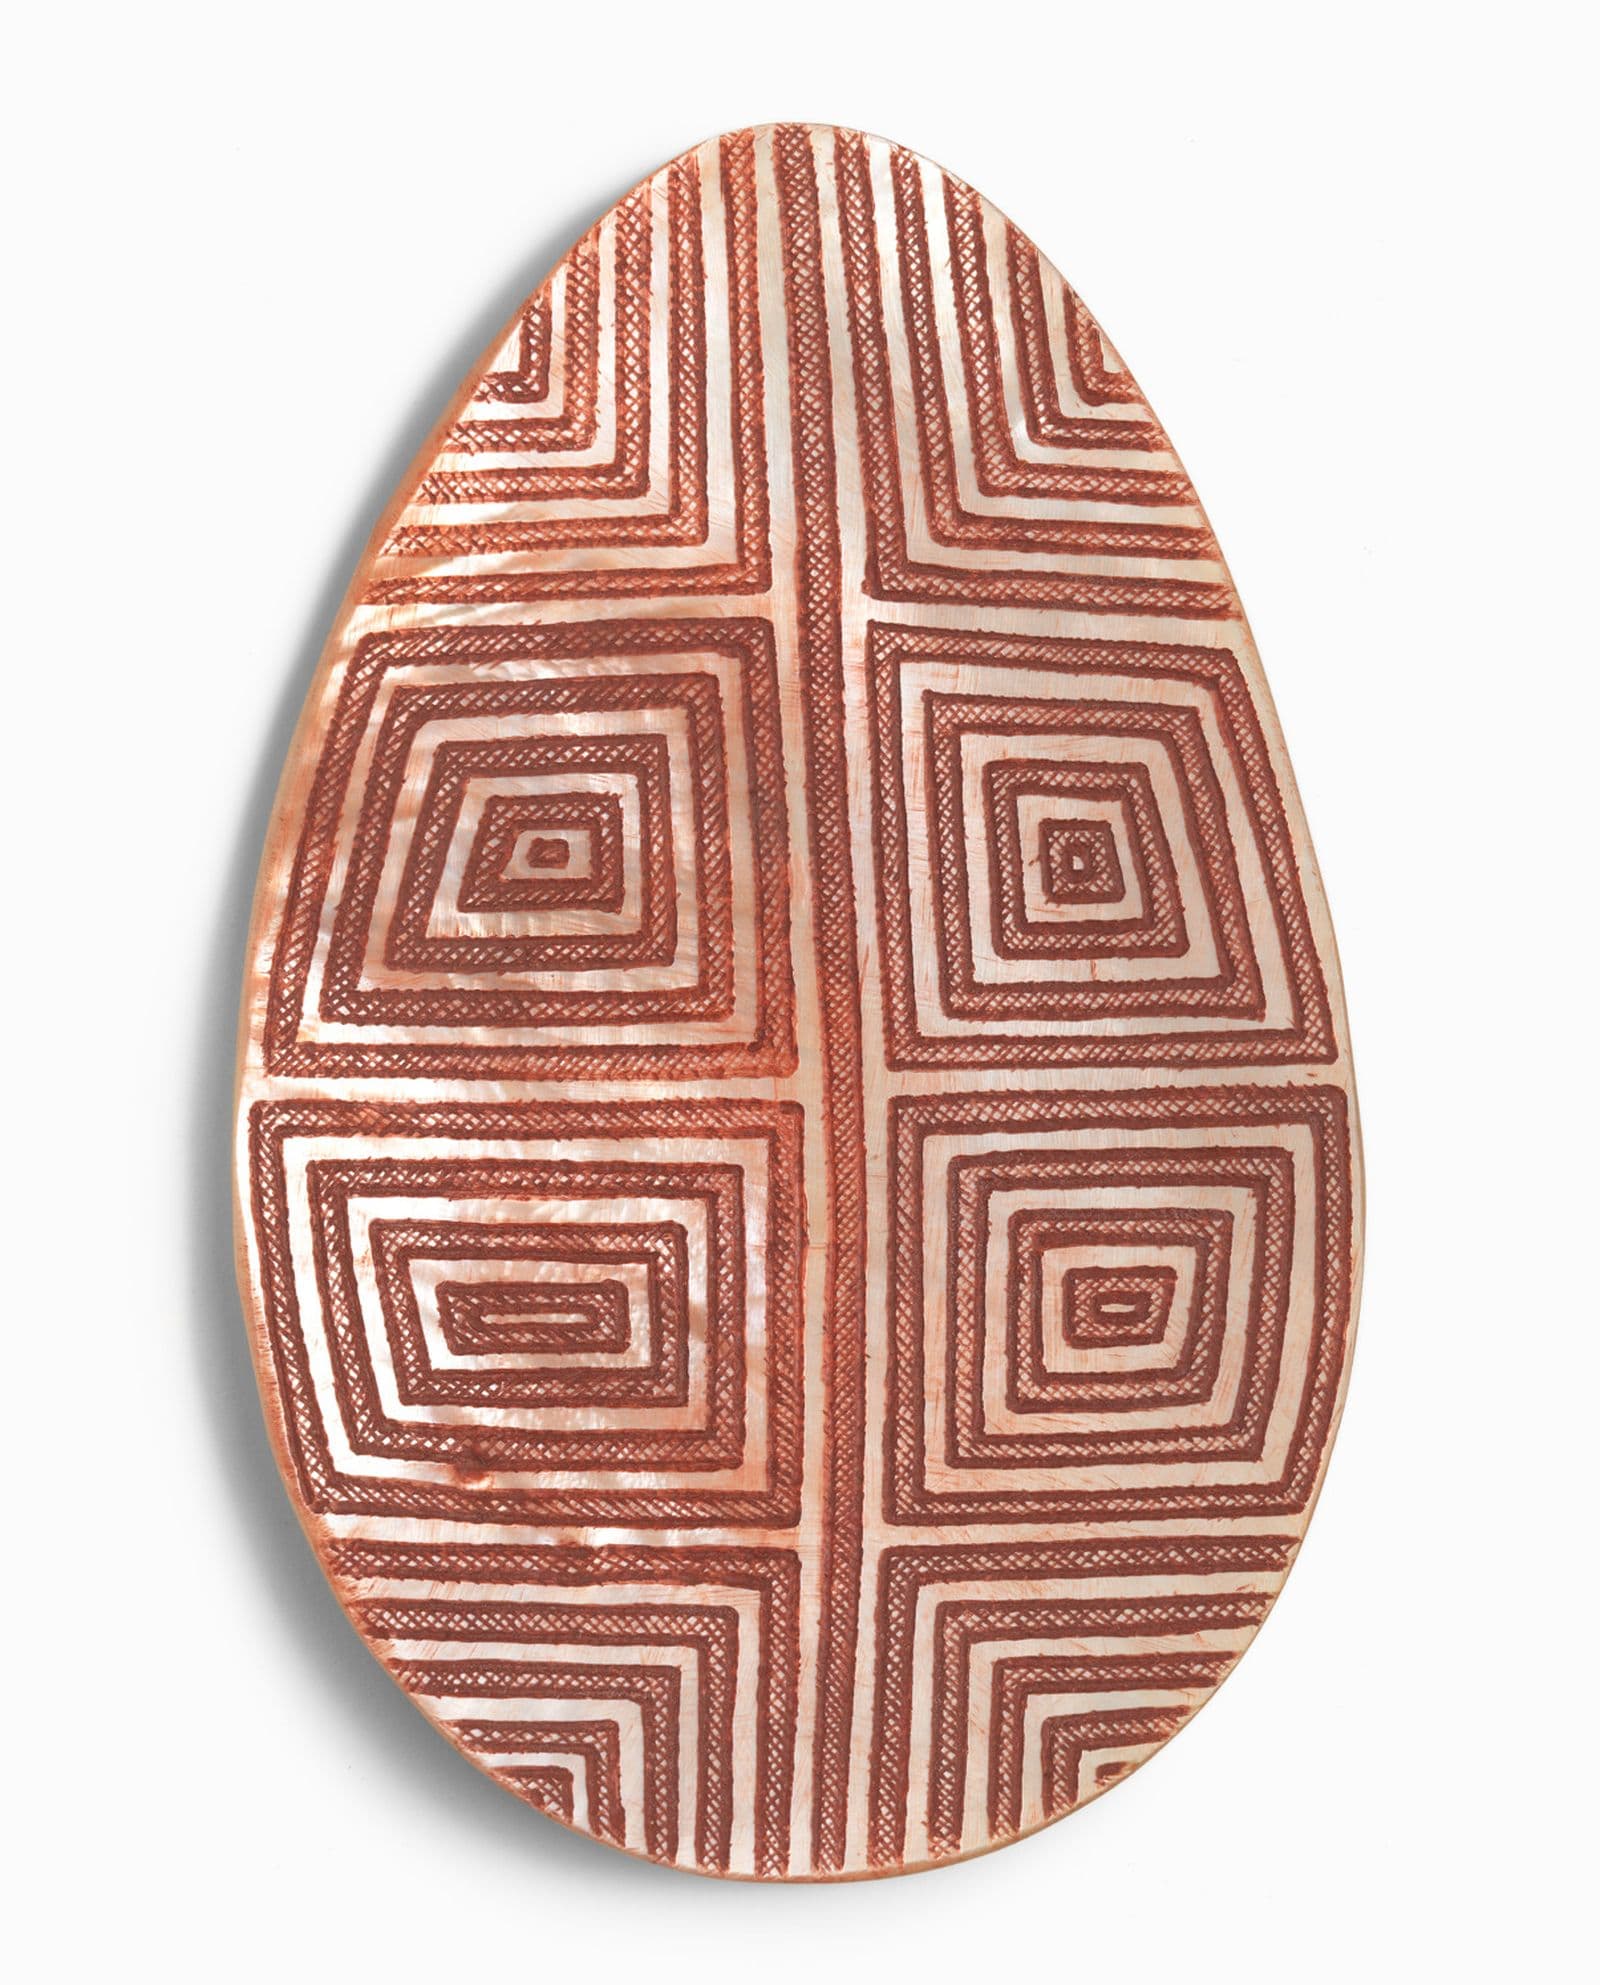 the inside of a large pearl shell that has been carved in an intricate design and coloured with reddish-brown ocher